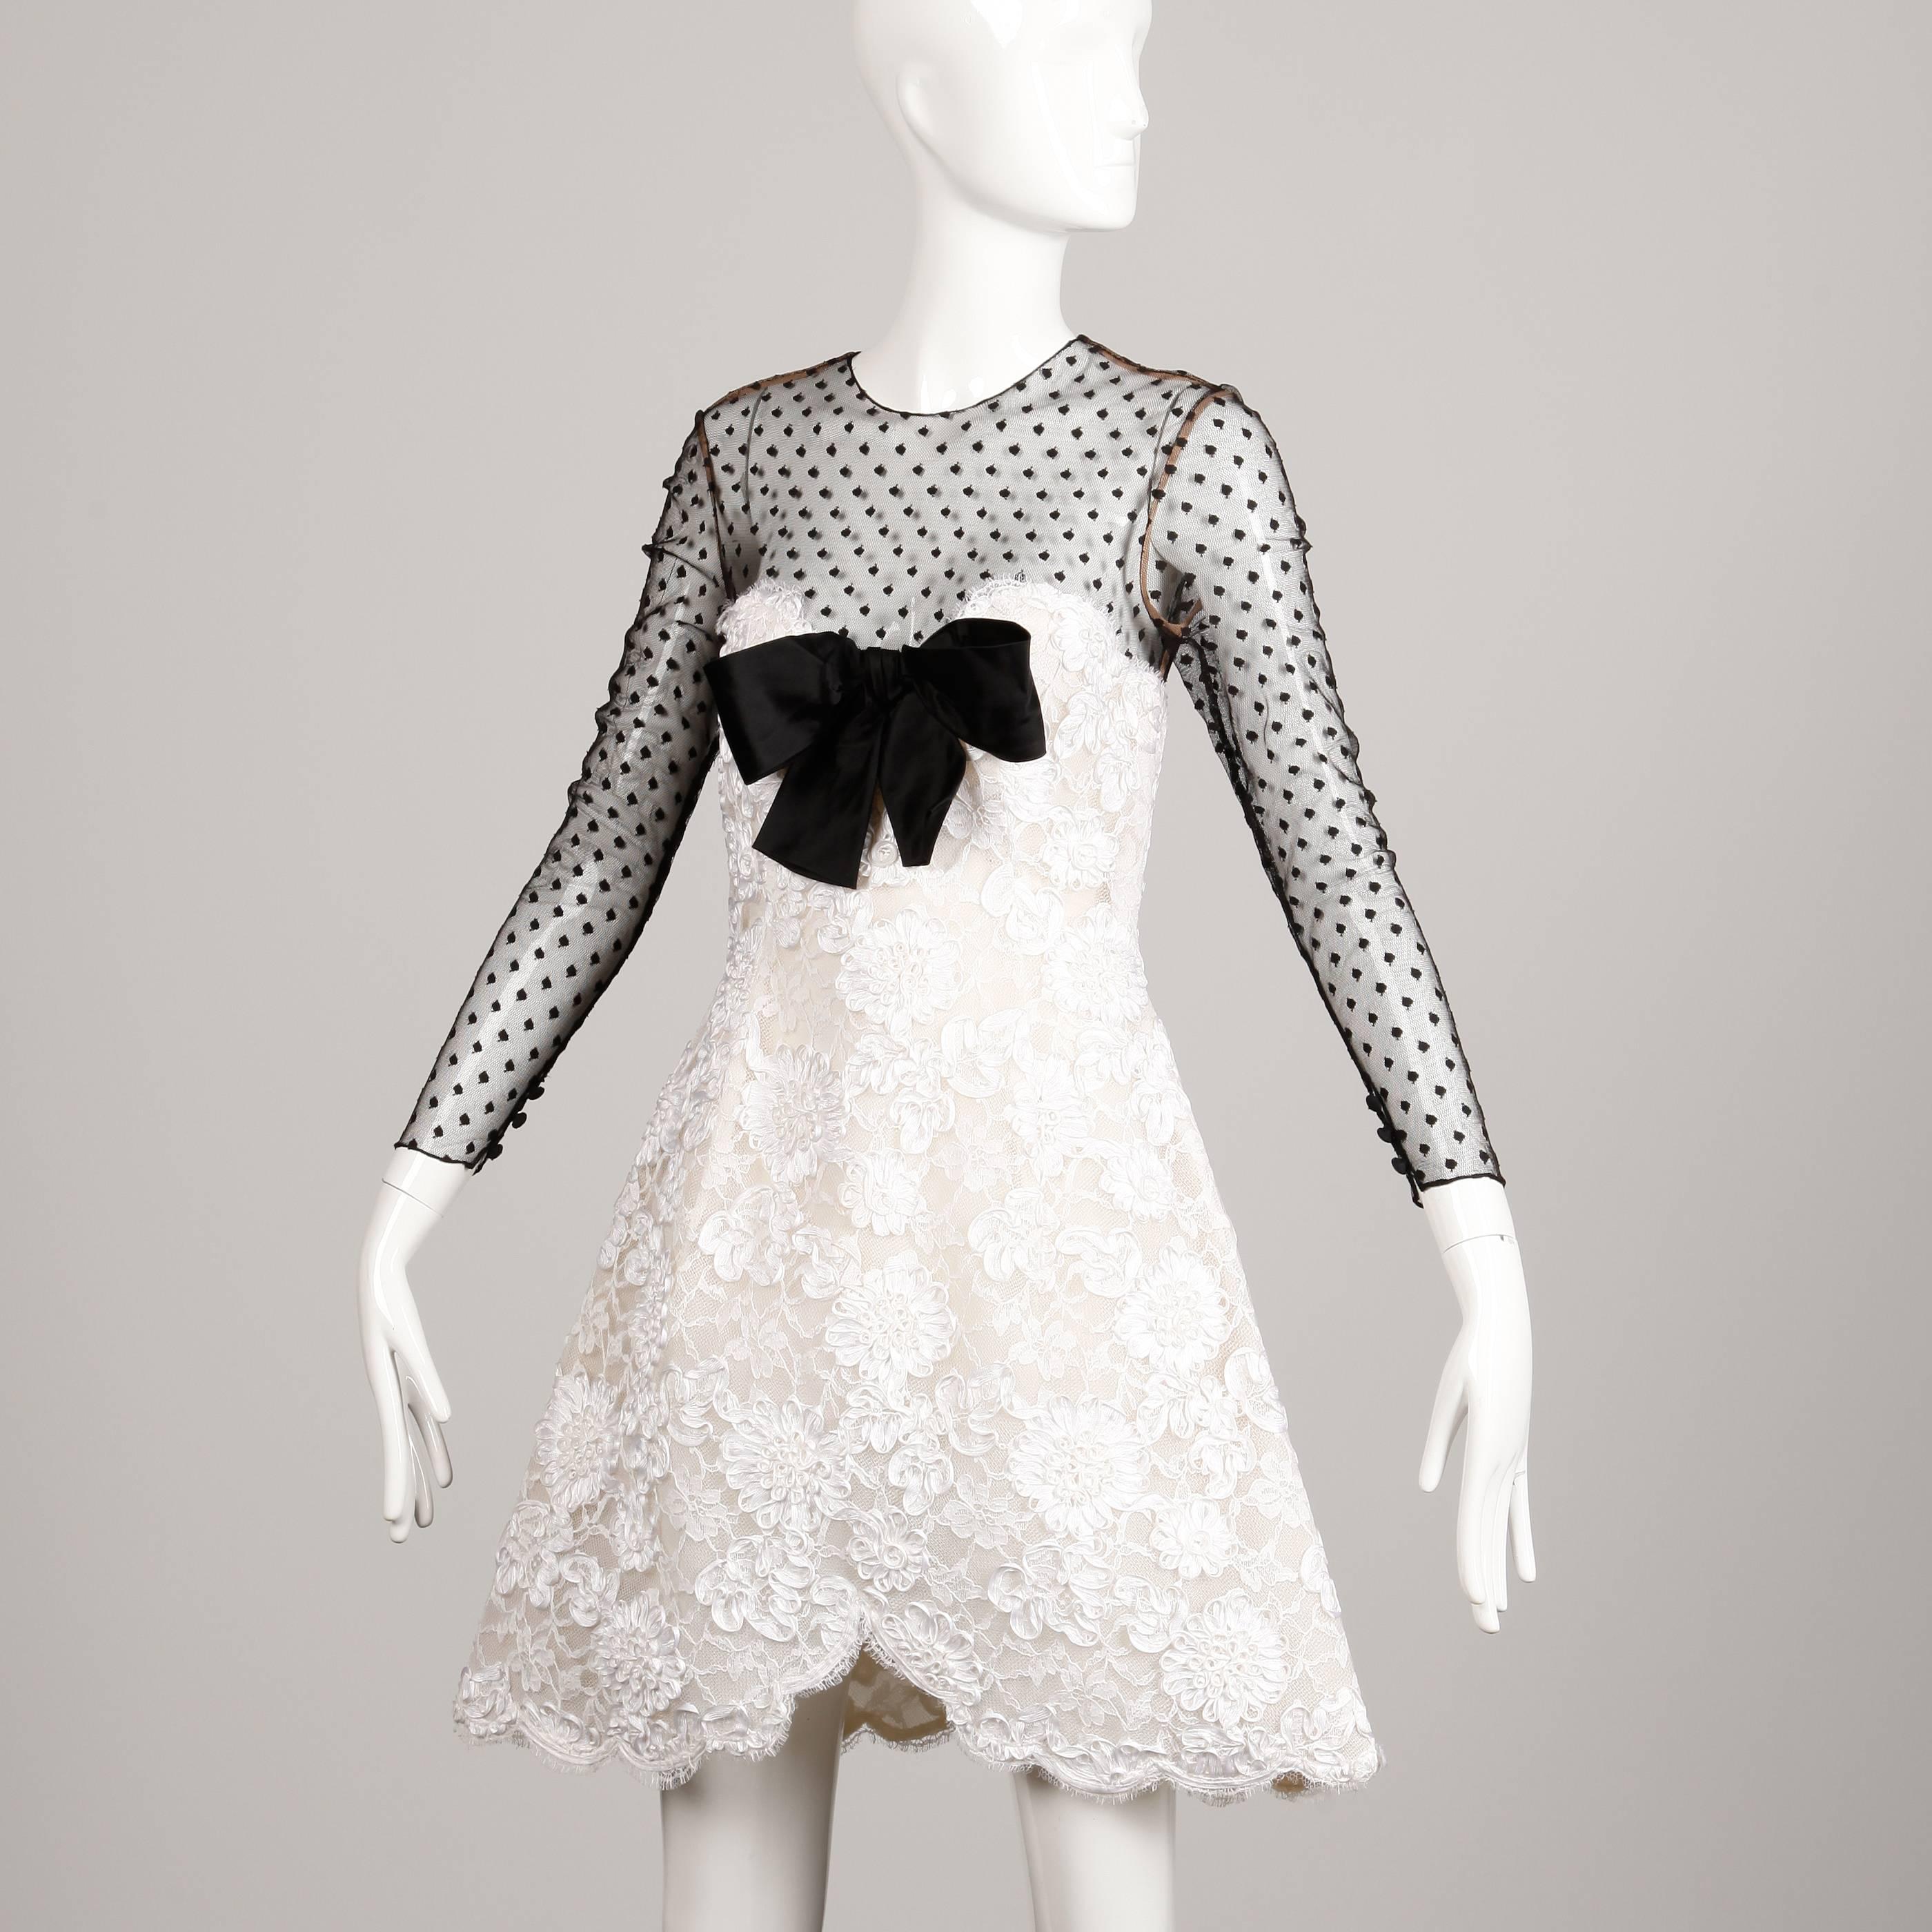 Darling black and white cocktail dress by Bill Blass. Sweetheart neckline and scalloped hem. Mesh sleeves and black silk bow detail at the bust. Fits like a modern size small. Bust: 34